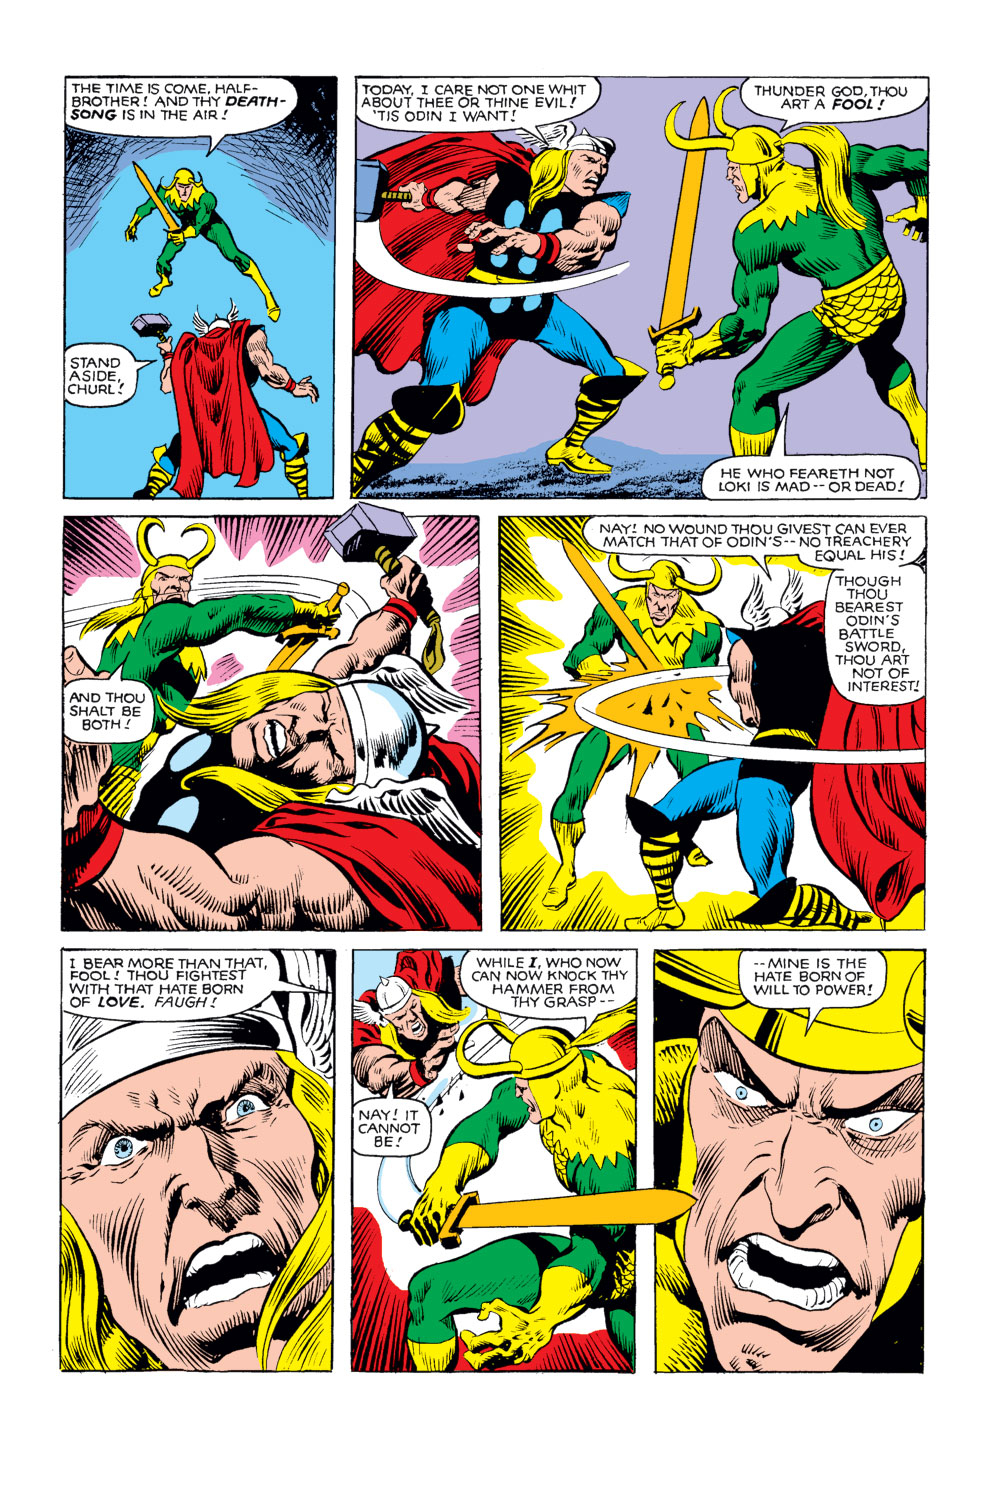 What If? (1977) issue 25 - Thor and the Avengers battled the gods - Page 25